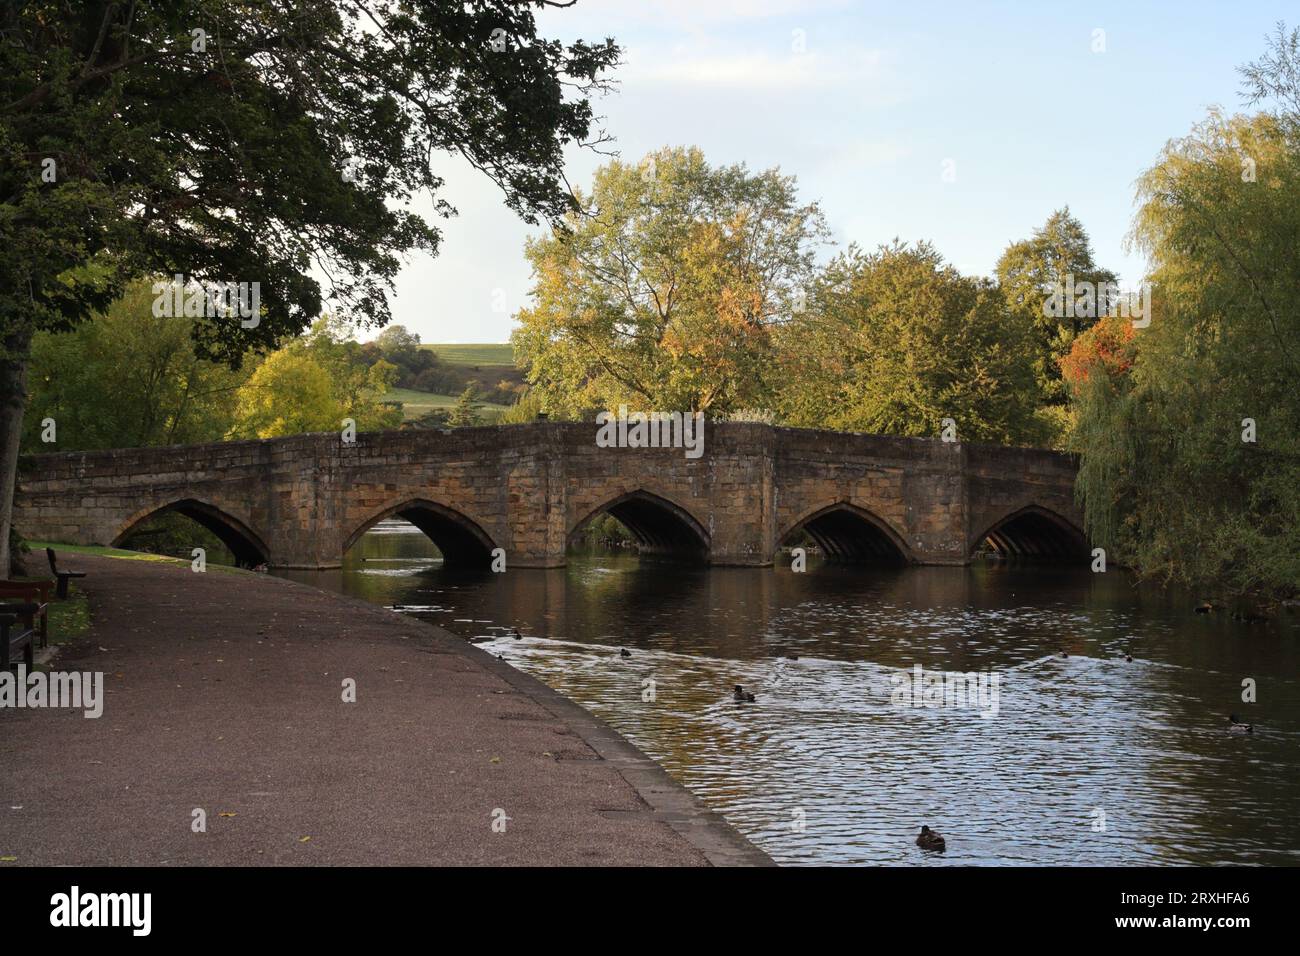 5 arch 13th century arched bridge spanning the river wye in Bakewell Derbyshire Peak District National park England UK, Historic listed structure Stock Photo